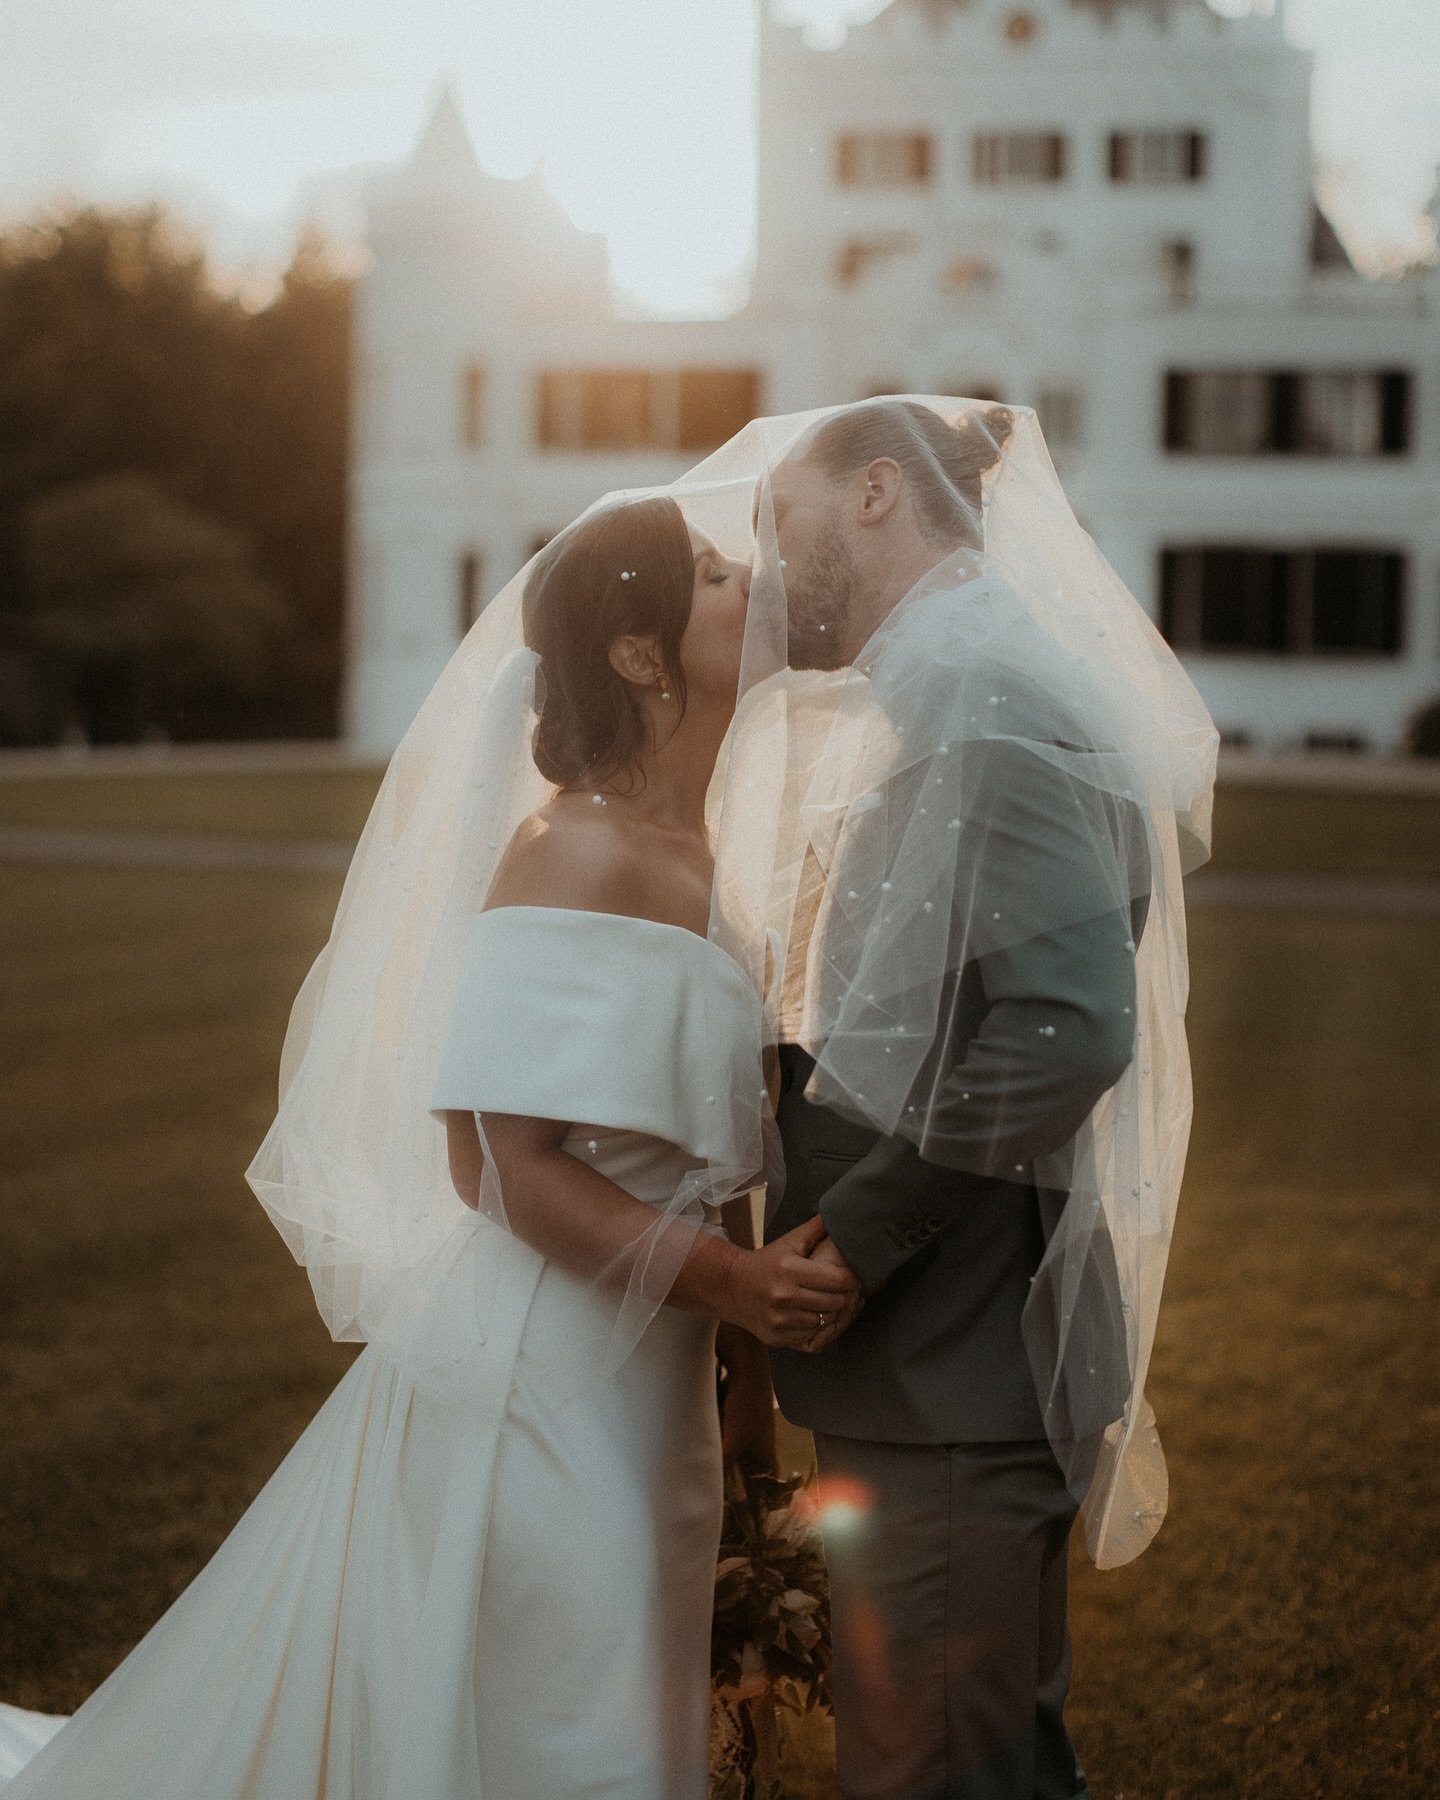 When the sun sets and love takes center stage, magic happens 🌅🪄 (photos &amp; stills)
⠀⠀⠀⠀⠀⠀⠀⠀⠀
Anouk &amp; Bjorn&rsquo;s wedding at Landgoed Oranjerie Sandenburg was nothing short of a fairytale. Swipe to see every breathtaking moment from their s